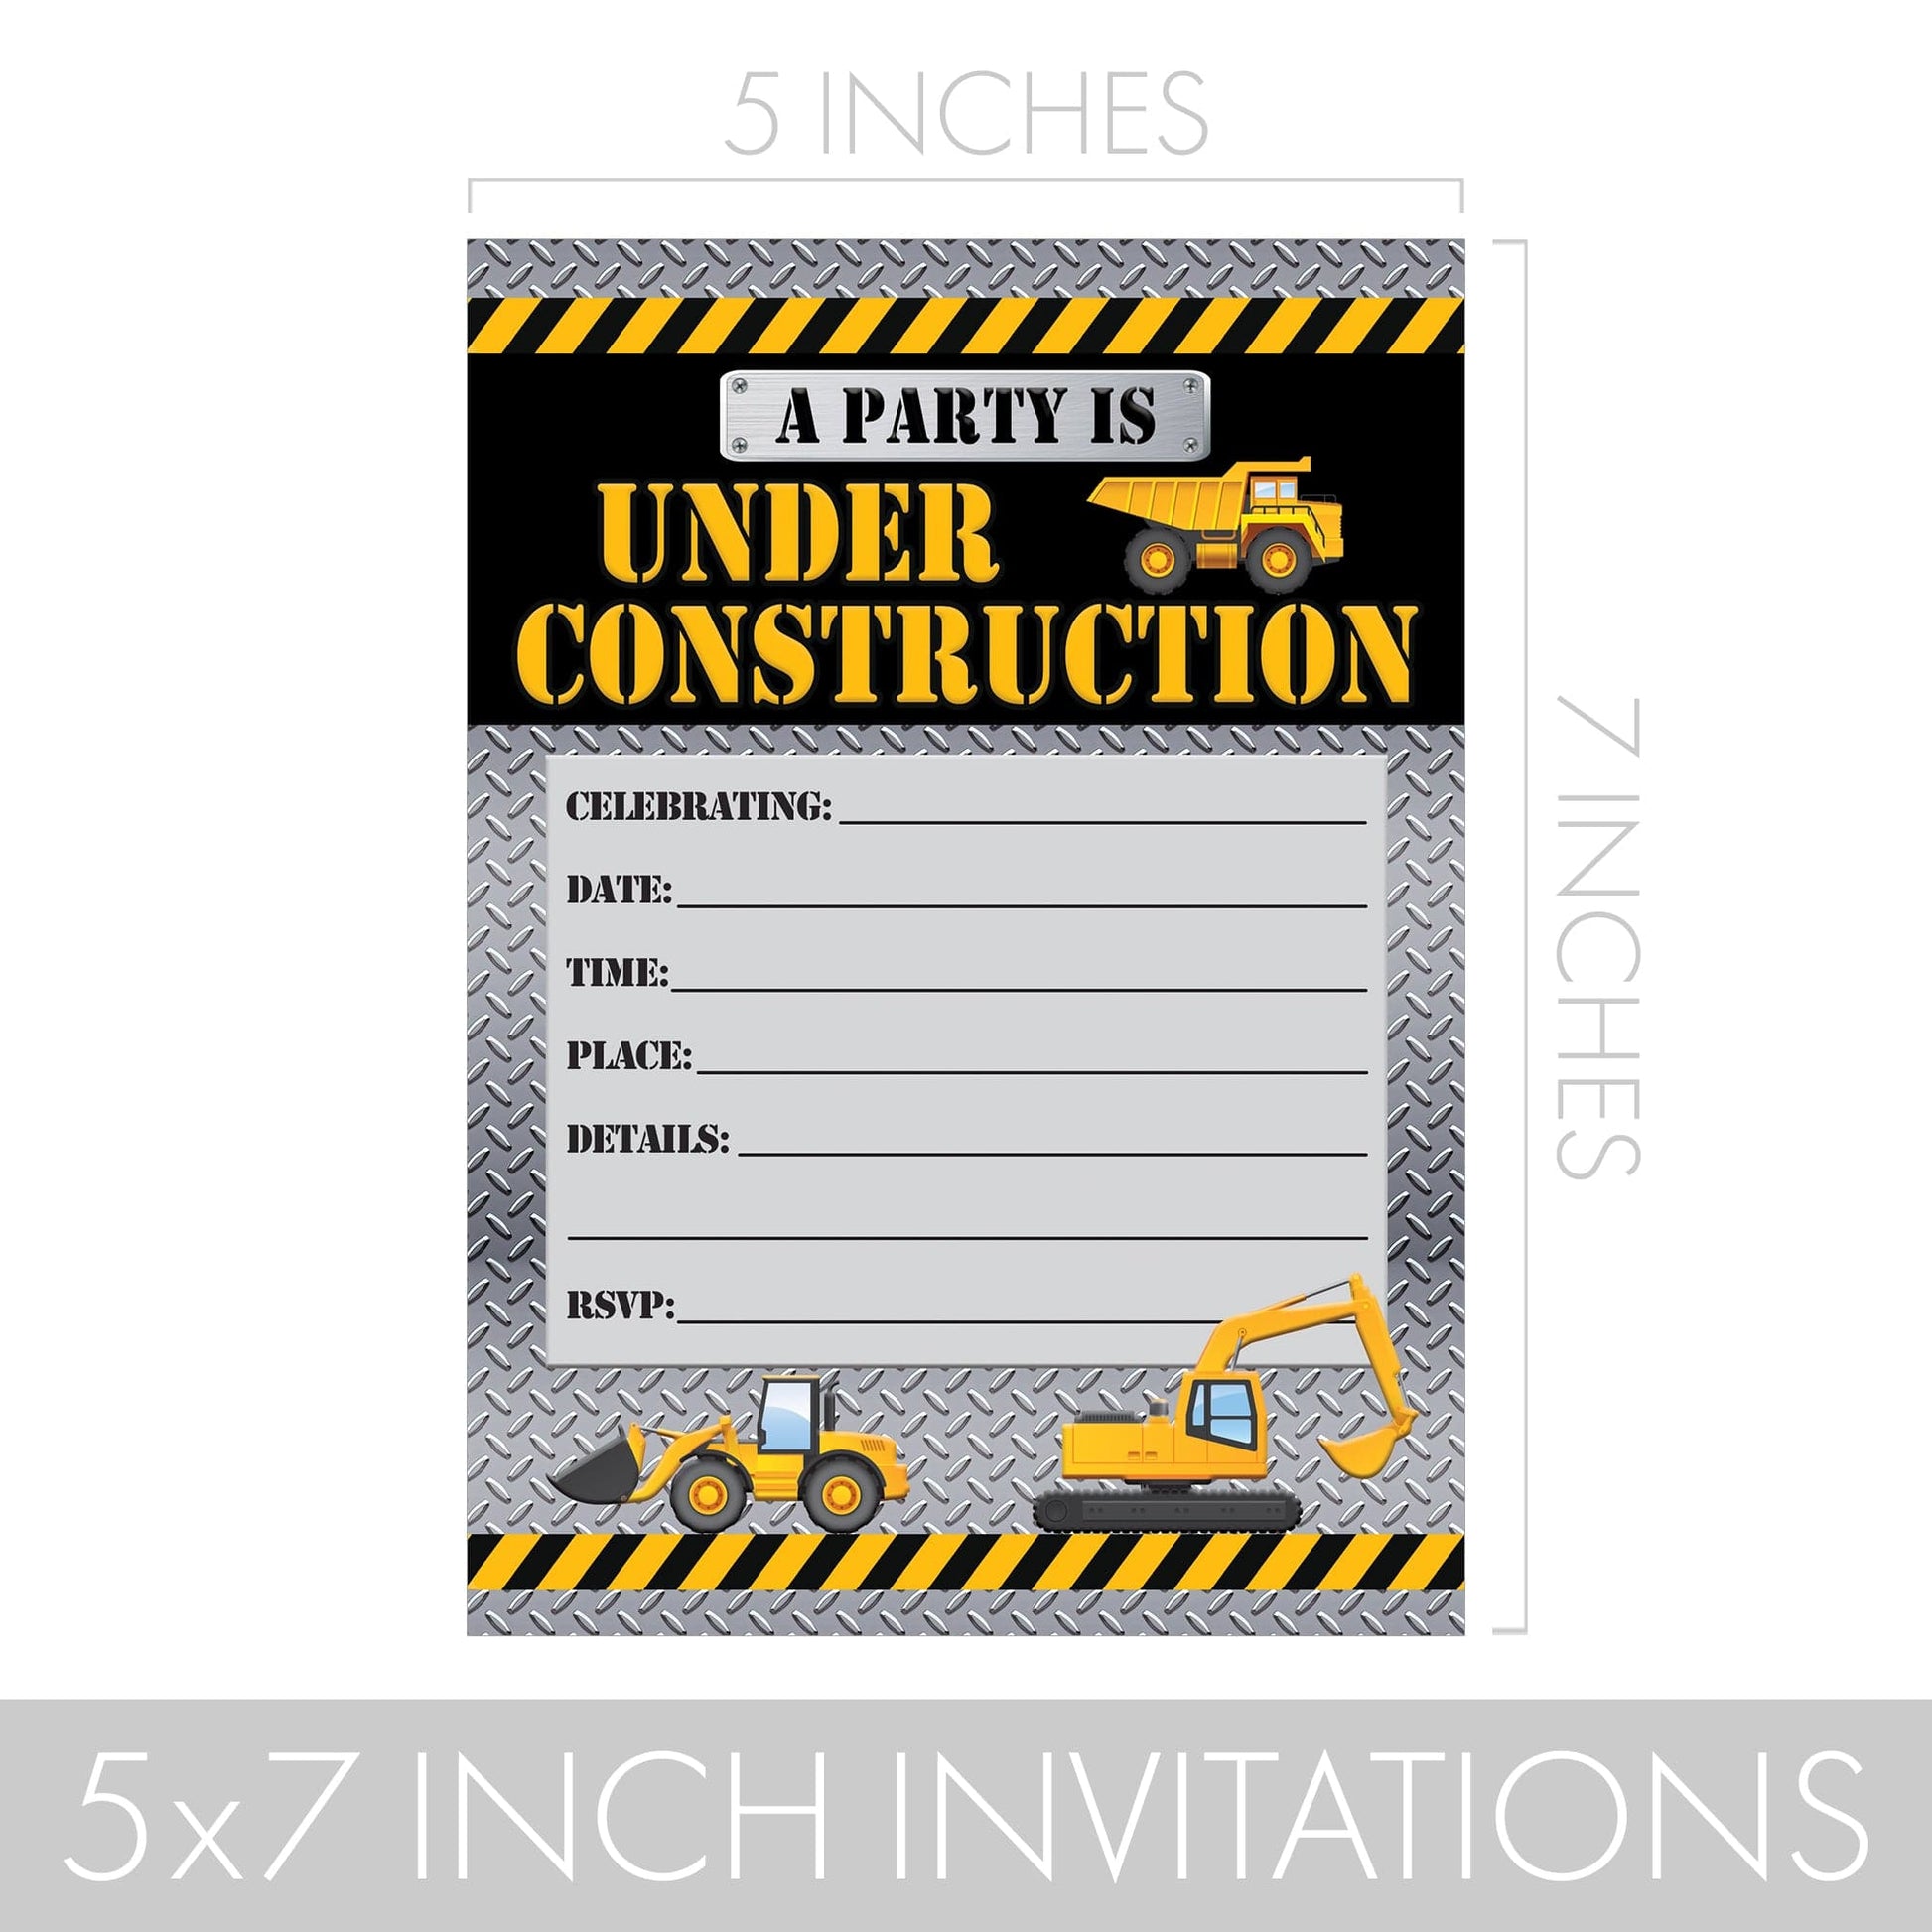 Under Construction Birthday Party Invitations - 10 Cards